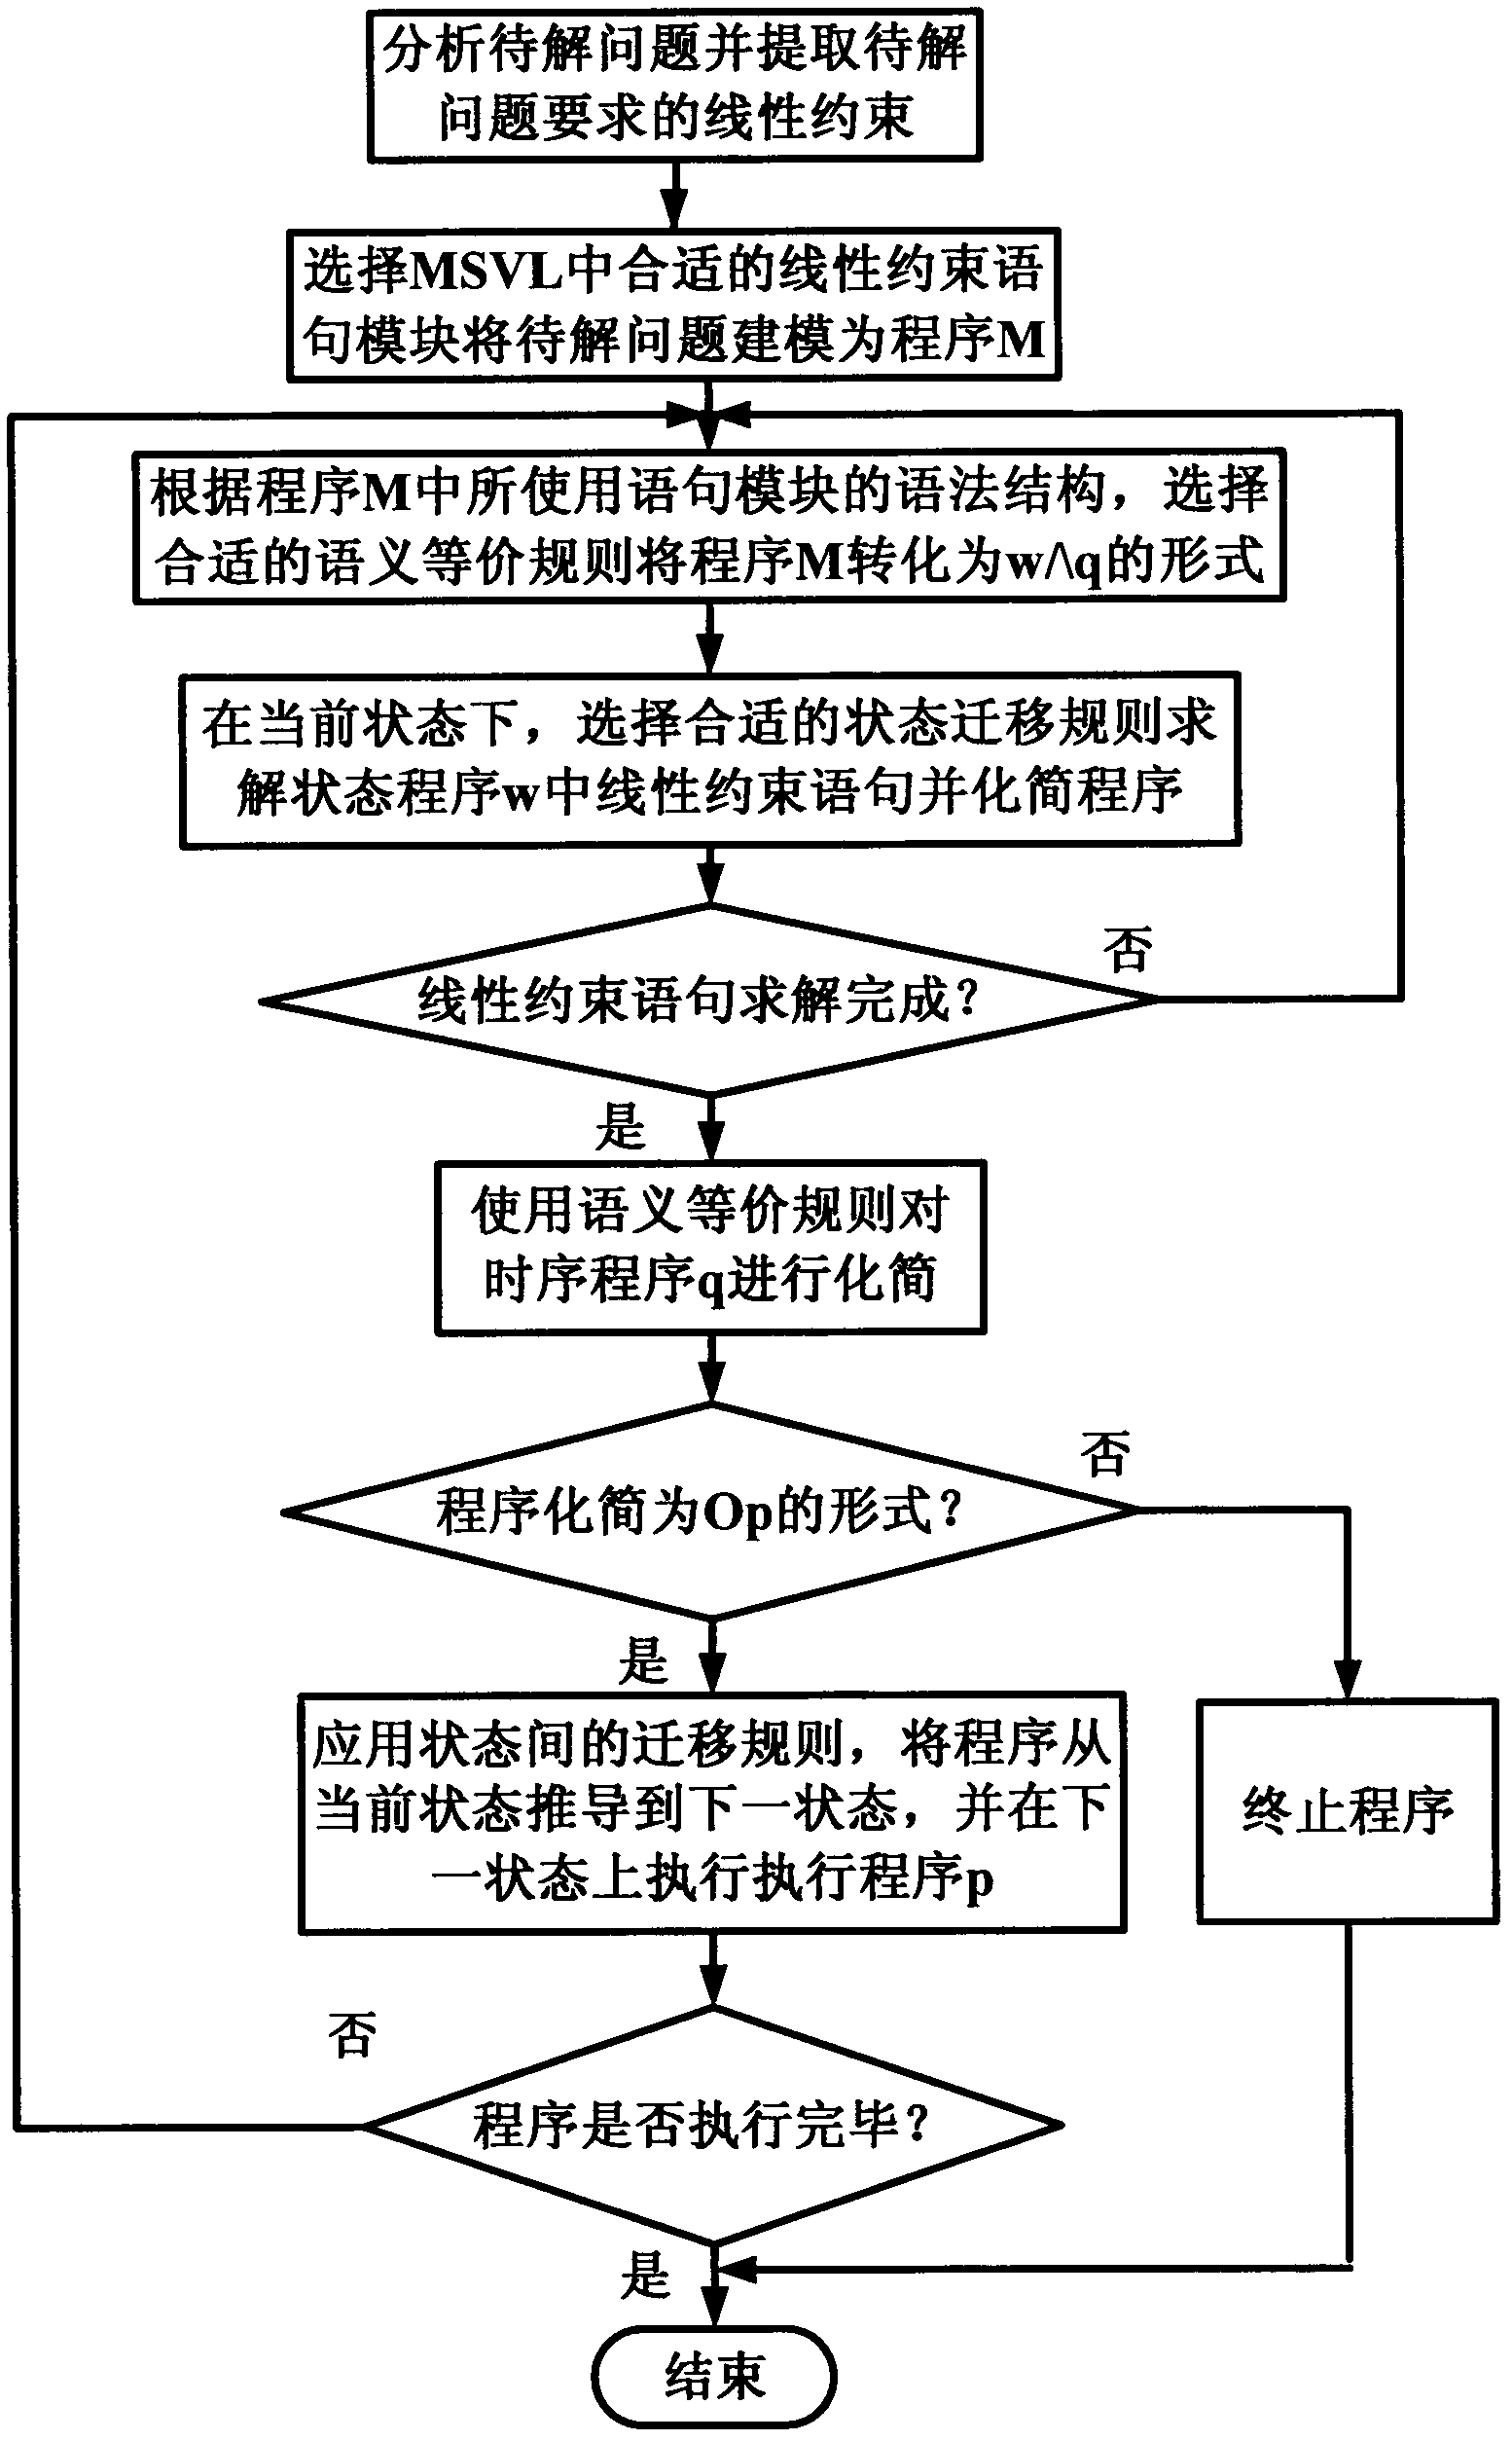 MSVL (modeling, simulation and verification language) linear constraint system and implementation method thereof